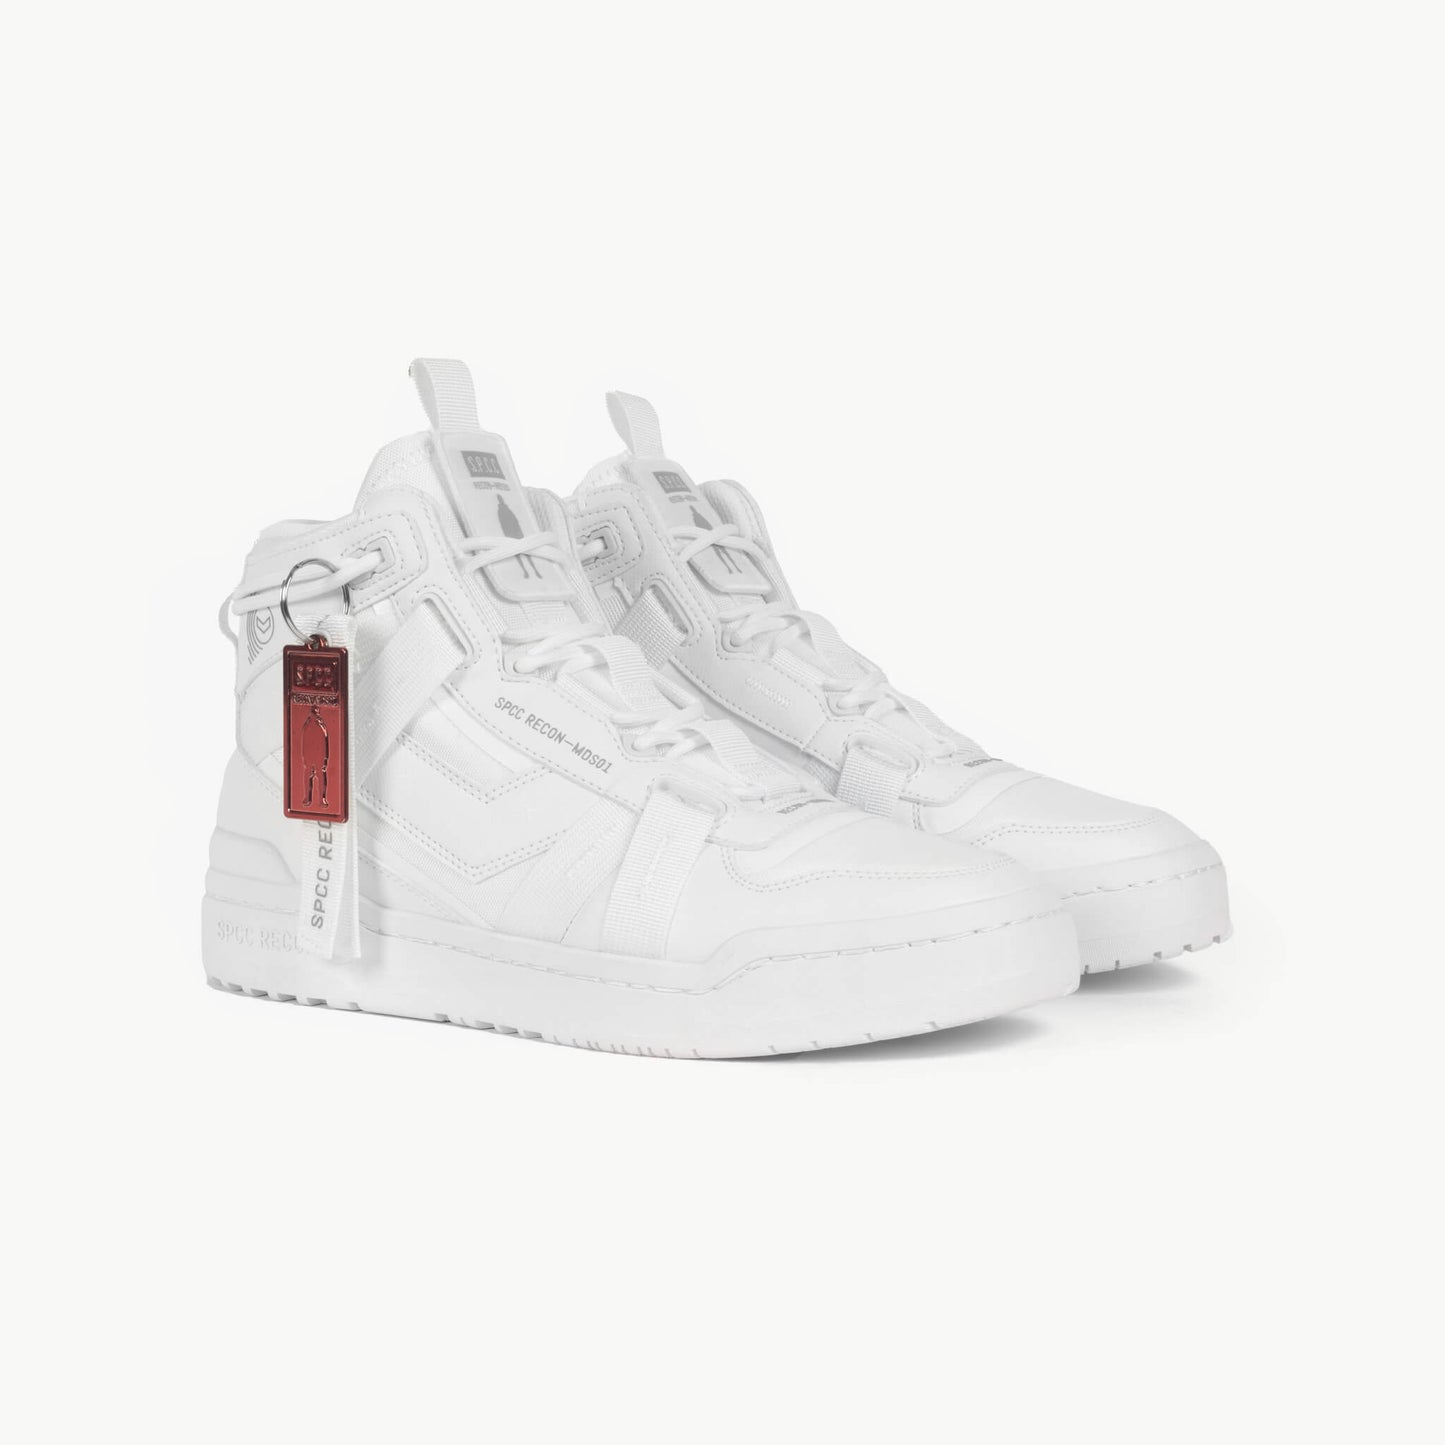 Recon MDS01 Hi Sneakers  - White